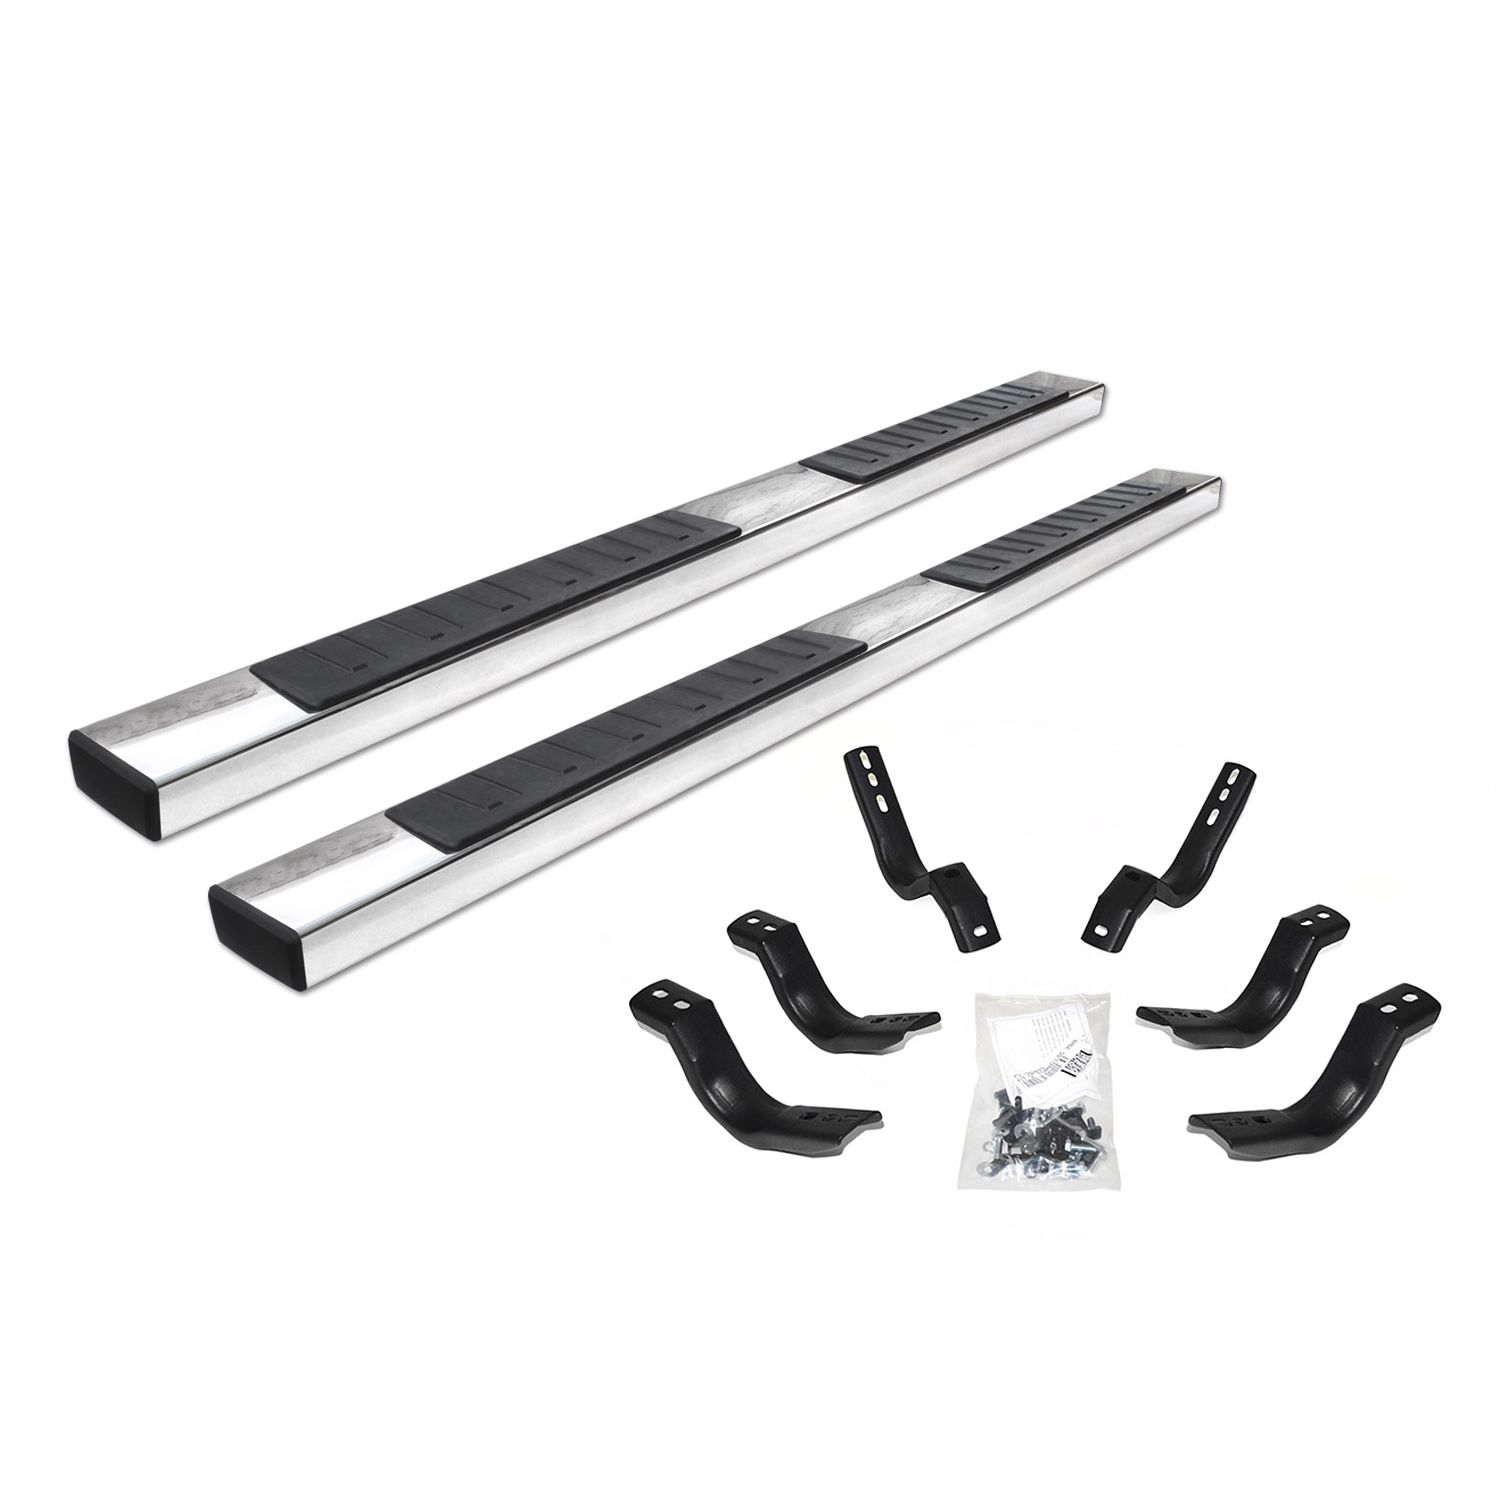 Go Rhino 6862449987PS - 6" OE Xtreme II Side Steps with Mounting Brackets Kit - Polished Stainless Steel